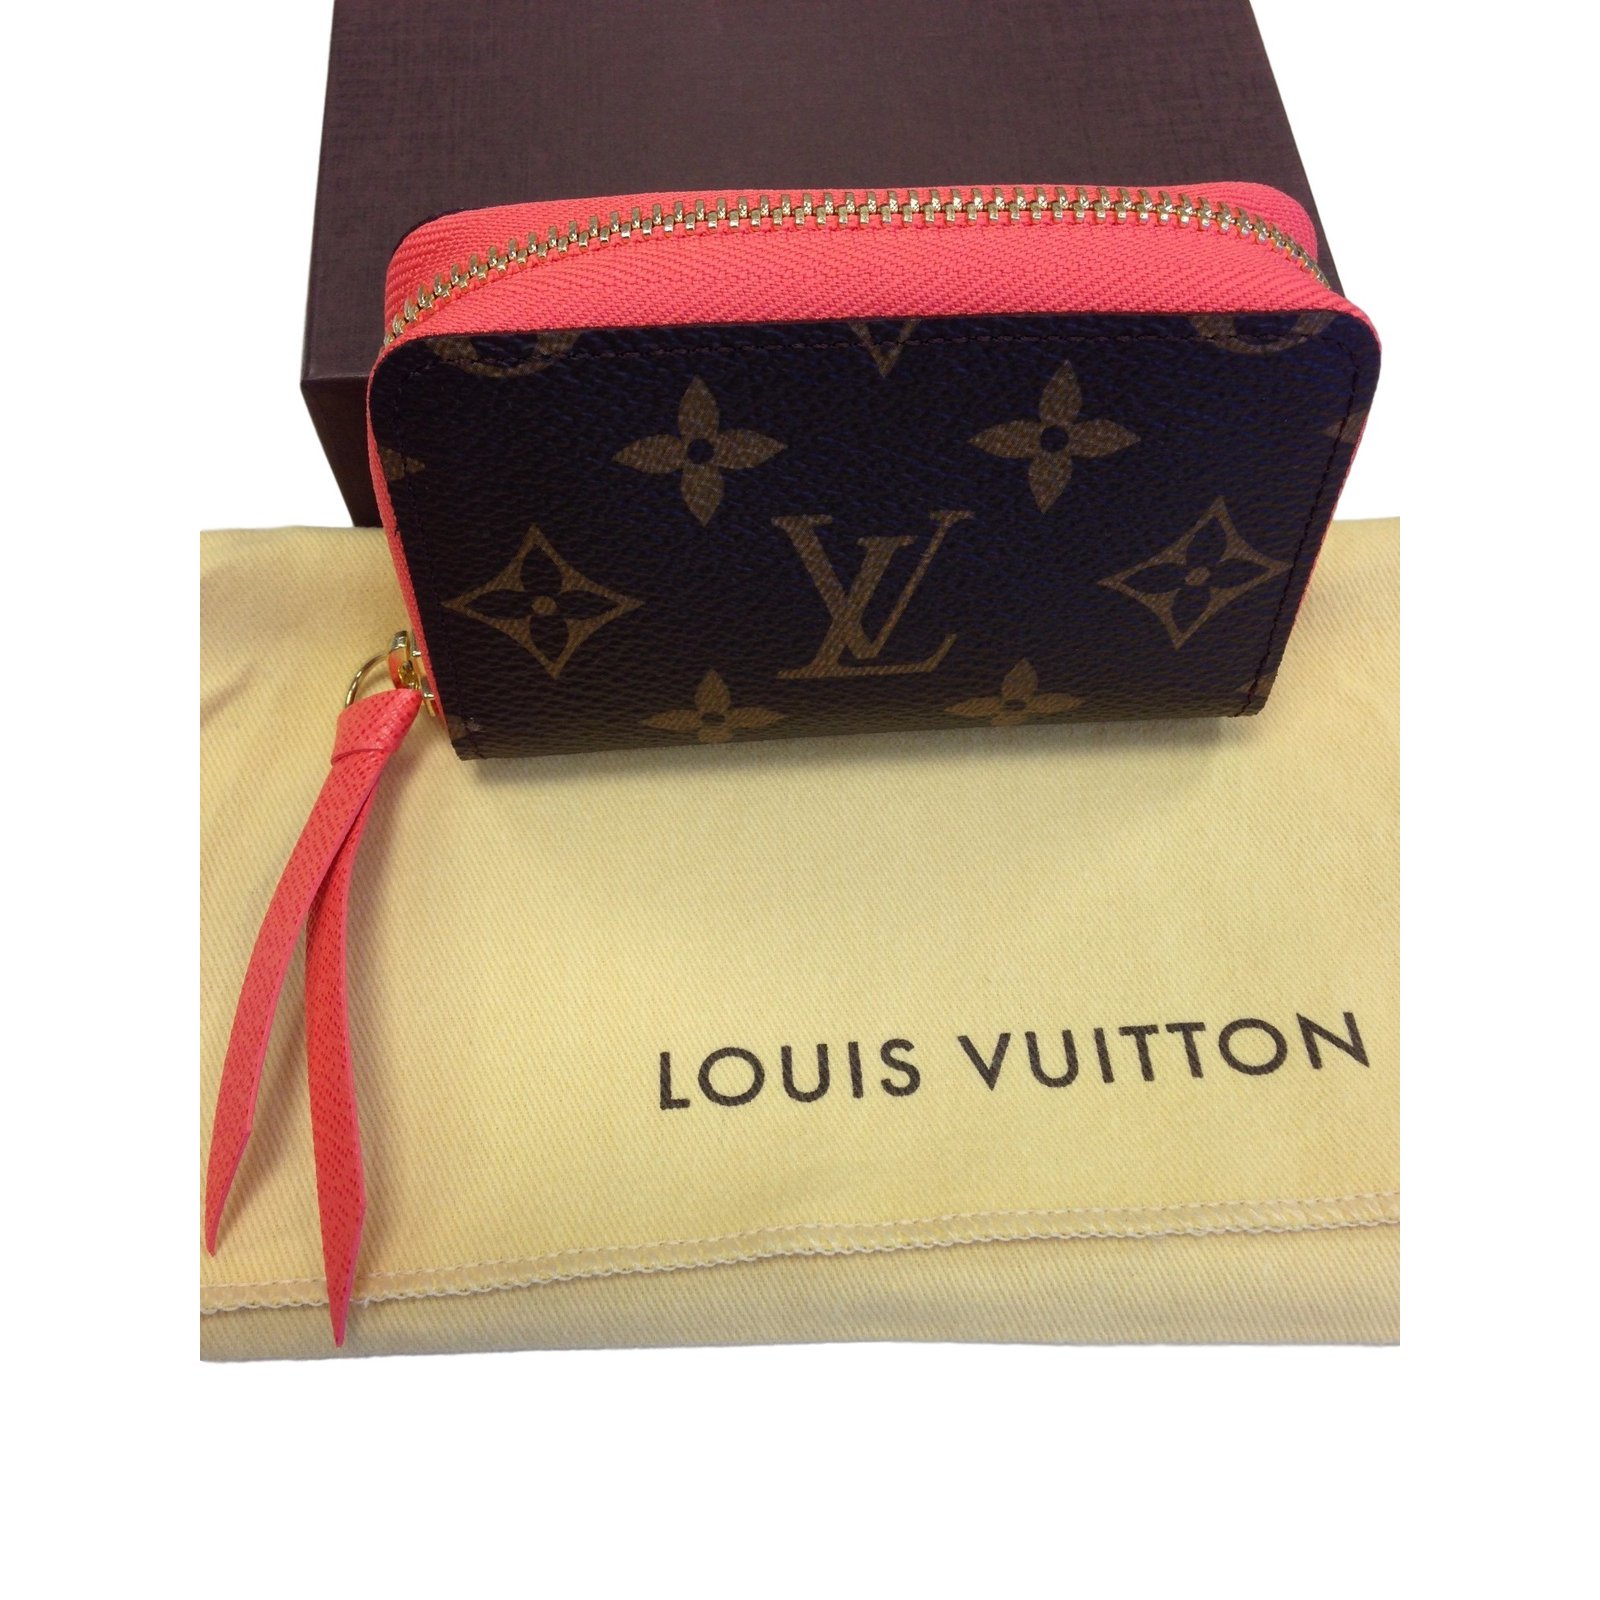 Louis Vuitton ZIPPY MULTICARTES CARD HOLDER in POPPY Purses, wallets, cases Other Brown ref ...